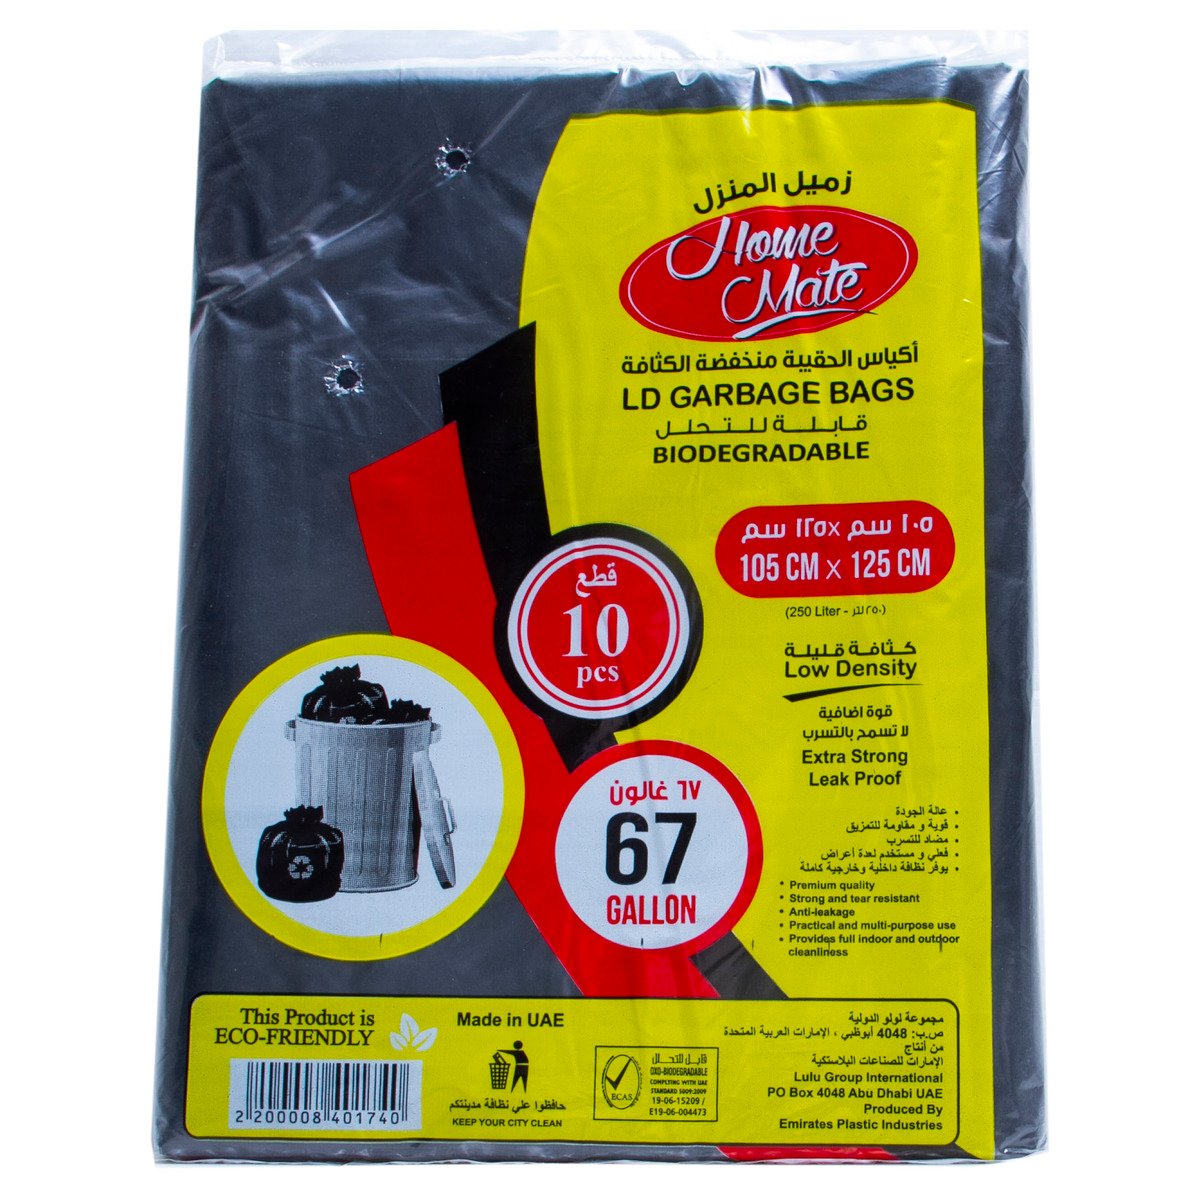 Home Mate Biodegradable Garbage Bags 67Gallons 105cm x 125cm 10pcs